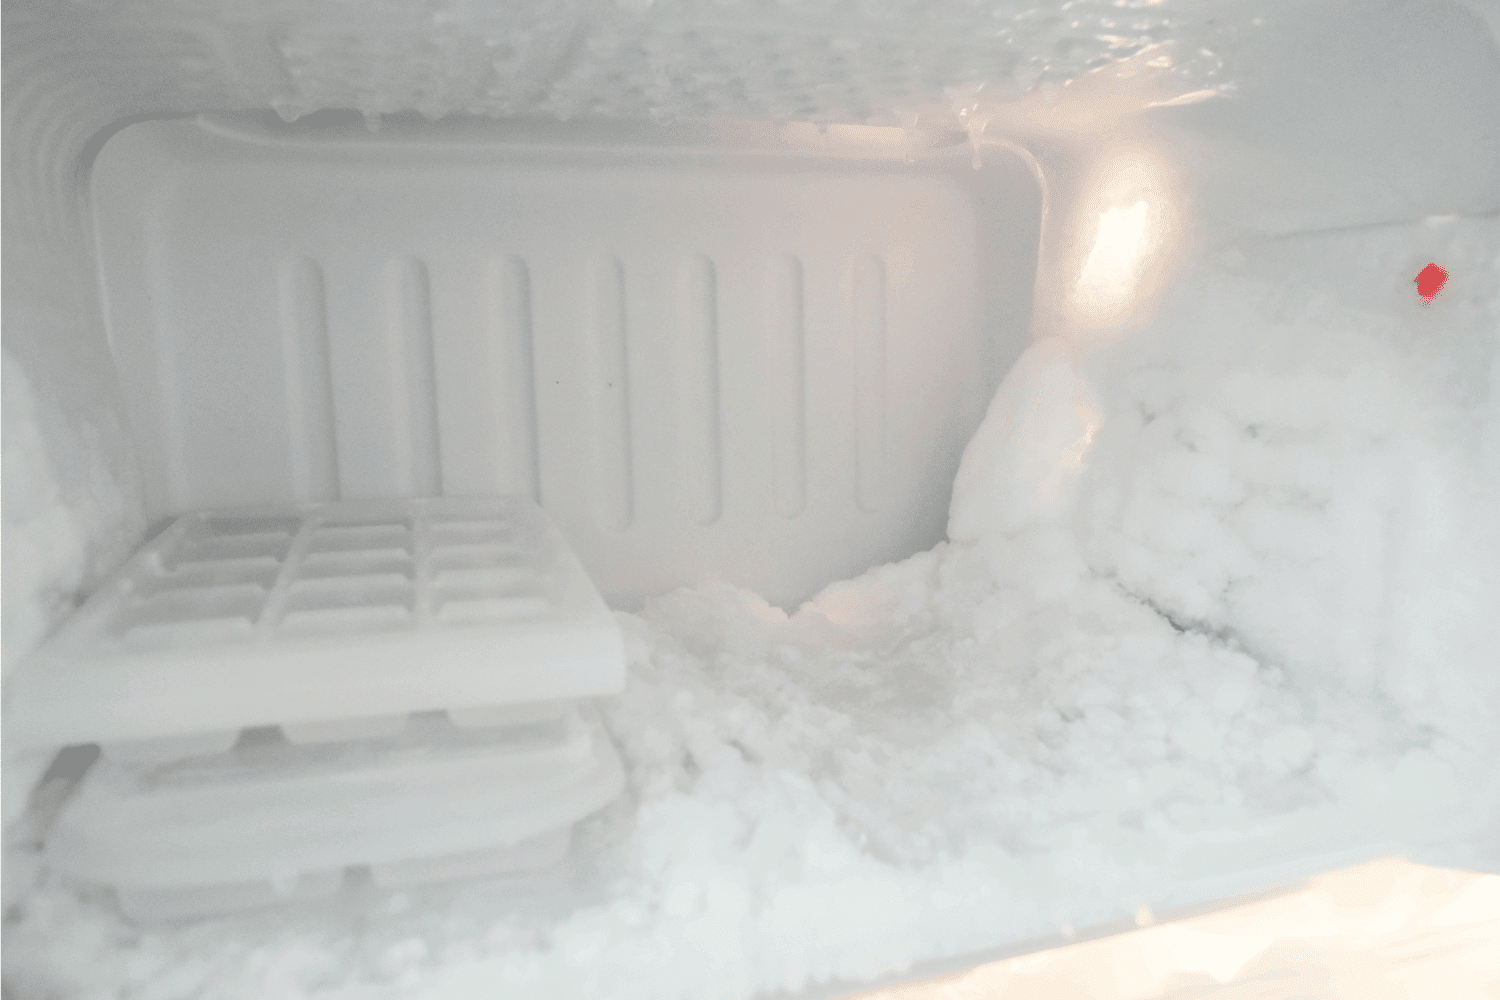 Freezer in the refrigerator. With too much ice Impact on the refrigerator does not work fully